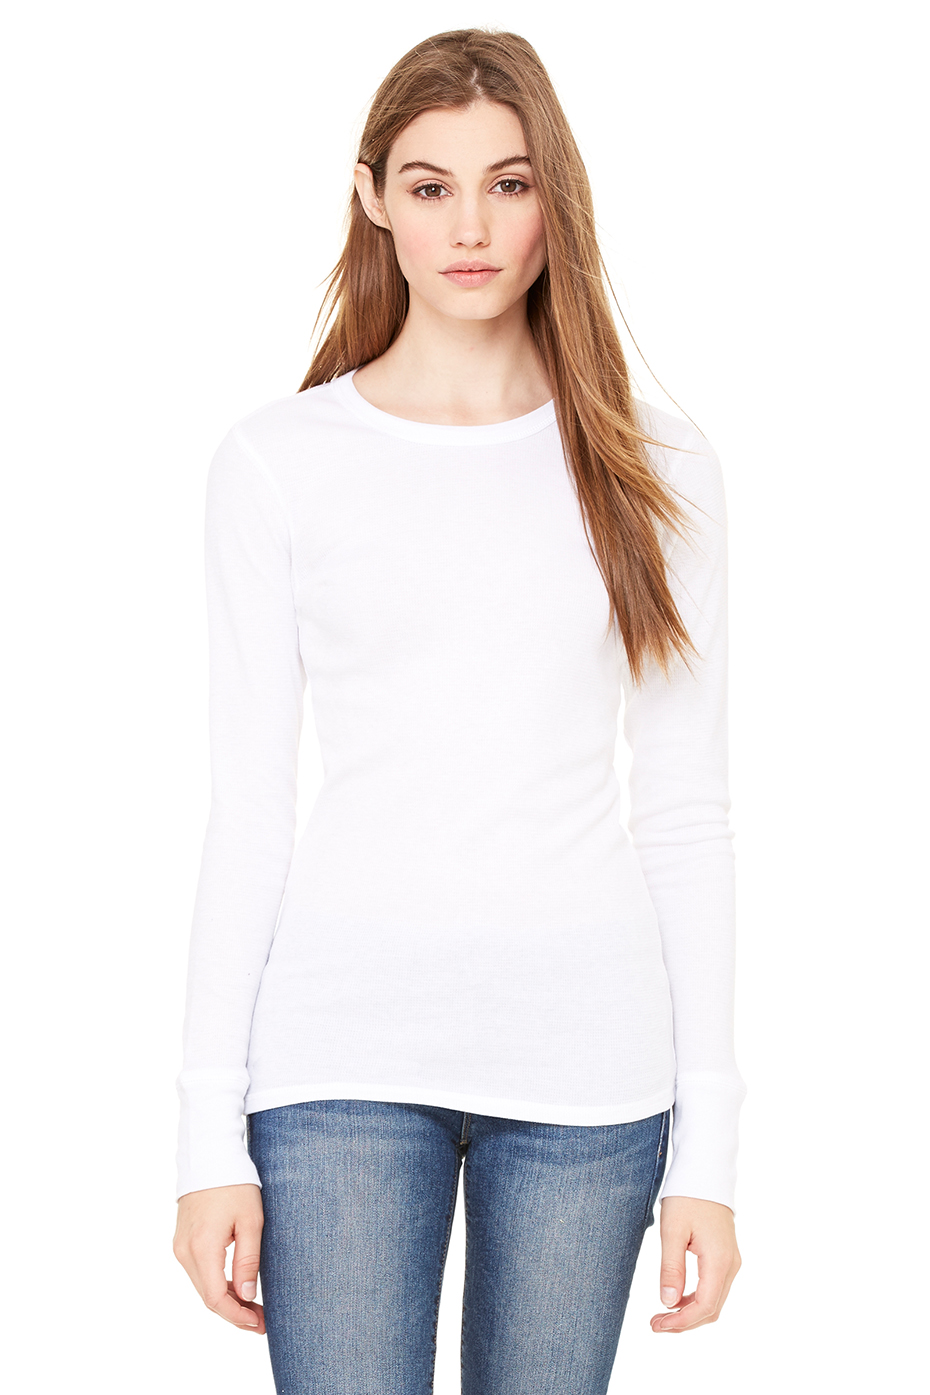 Wholesale Clothing | Women's Thermal L/S Tee